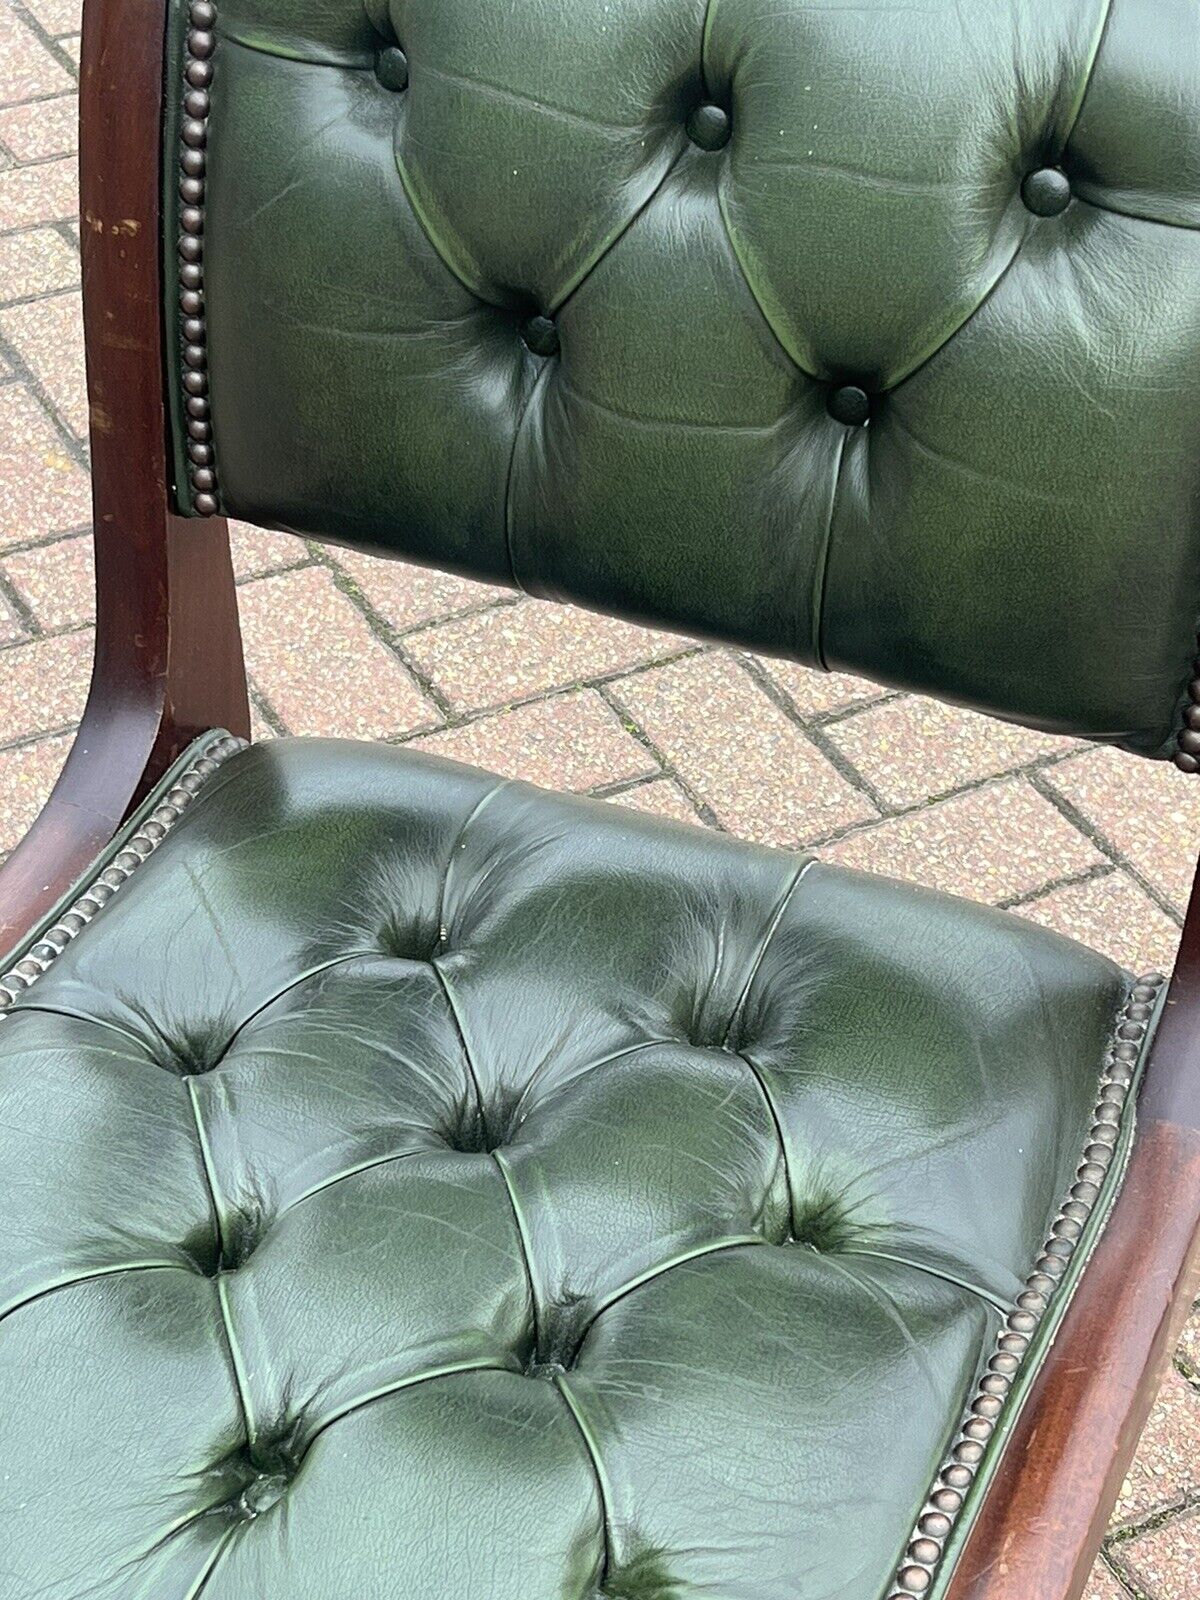 Desk Chair, Green Leather Buttoned Back  Swivel Desk Chair